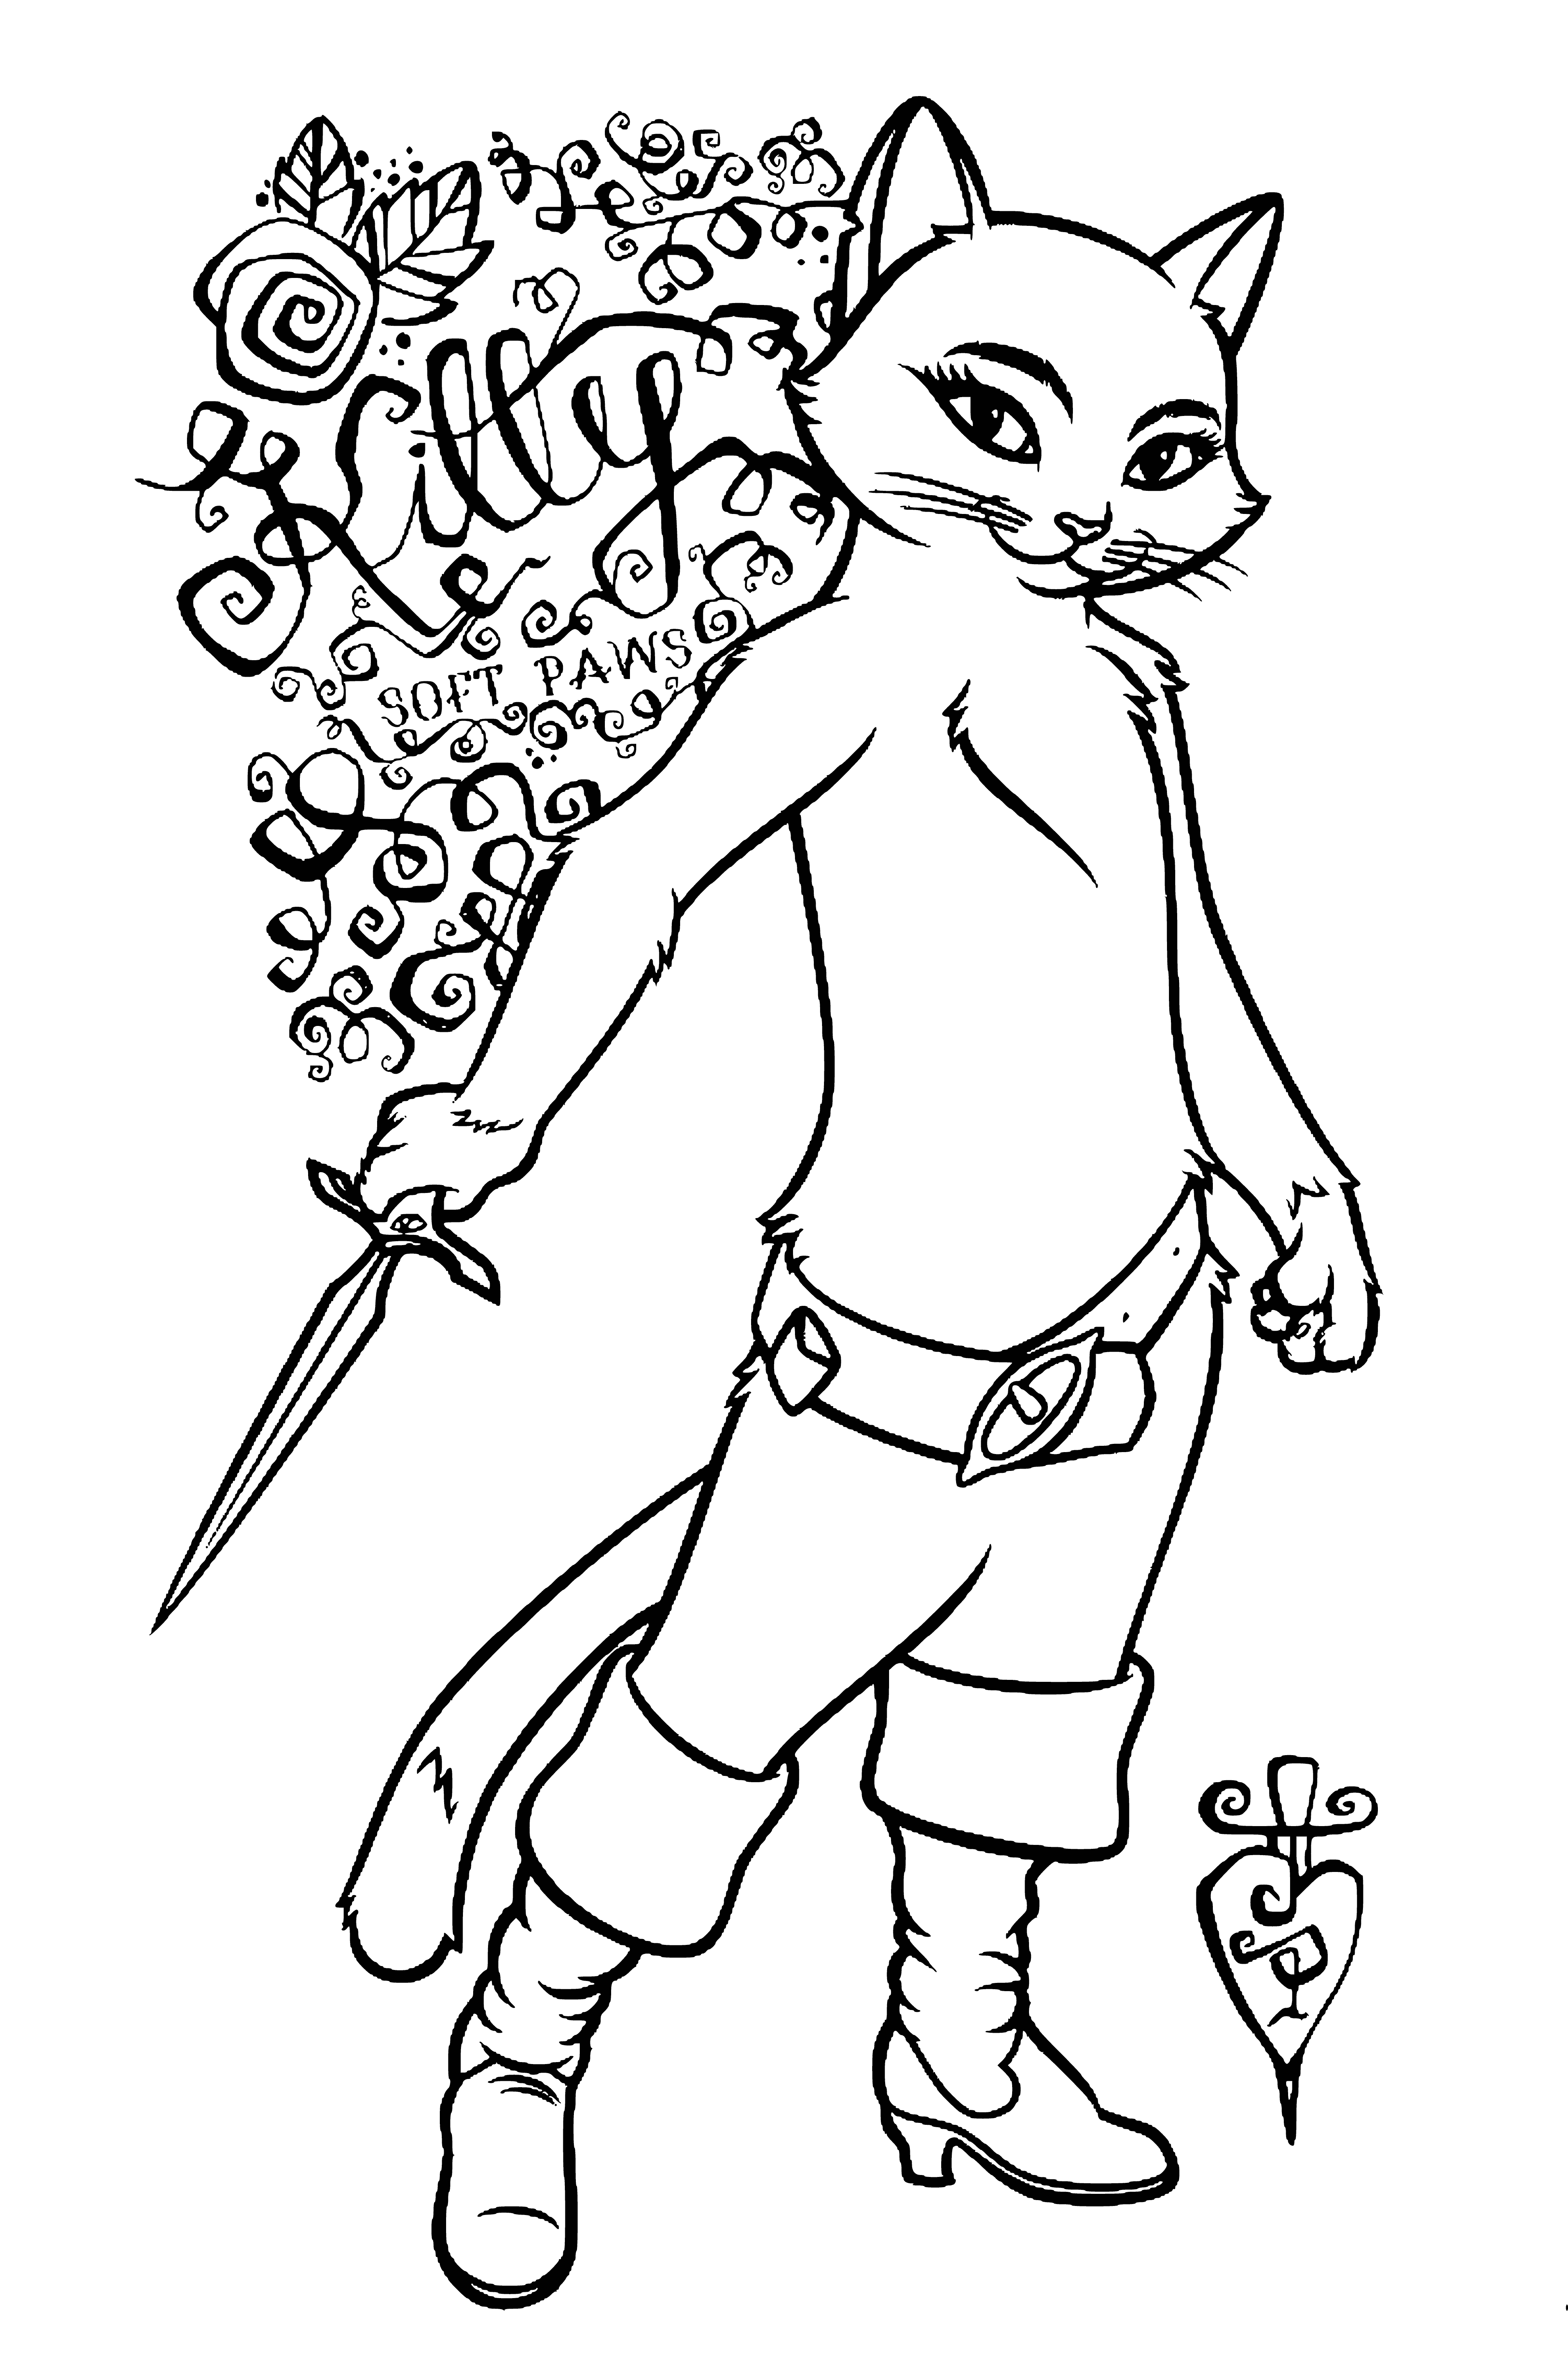 coloring page: Mischievous orange cat wearing boots and holding sword stands on hind legs in coloring page.